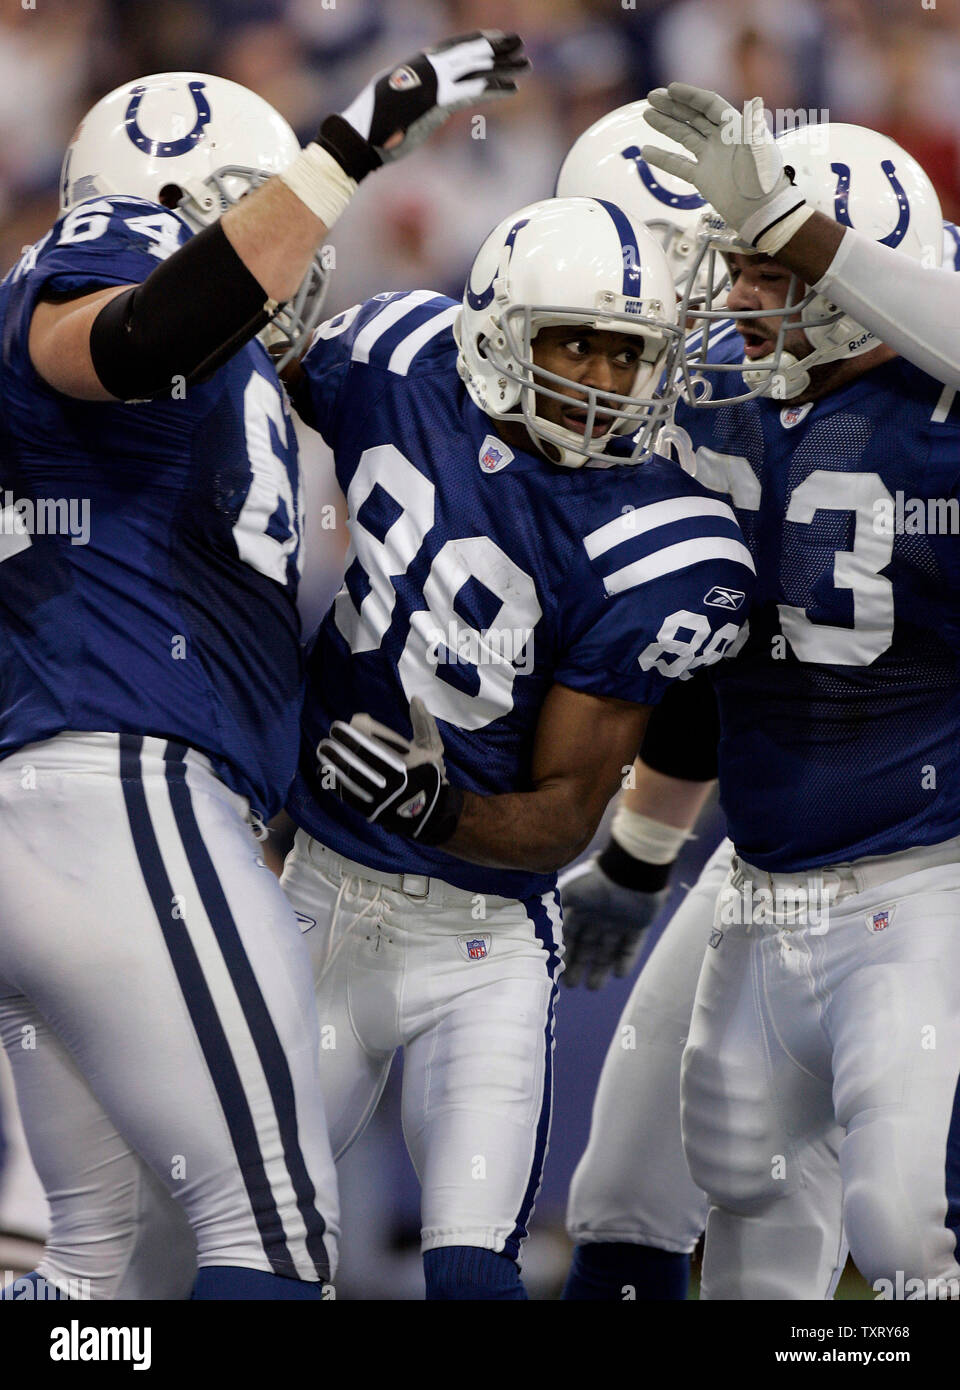 Indianapolis Colts' wide receiver Marvin Harrison (88) is congratulated by teammates after scoring as the Indianapolis Colts defeated the Baltimore Ravens 20-10 at the RCA Dome in Indianapolis, IN on December 19, 2004. (UPI Photo/Mark Cowan) Stock Photo